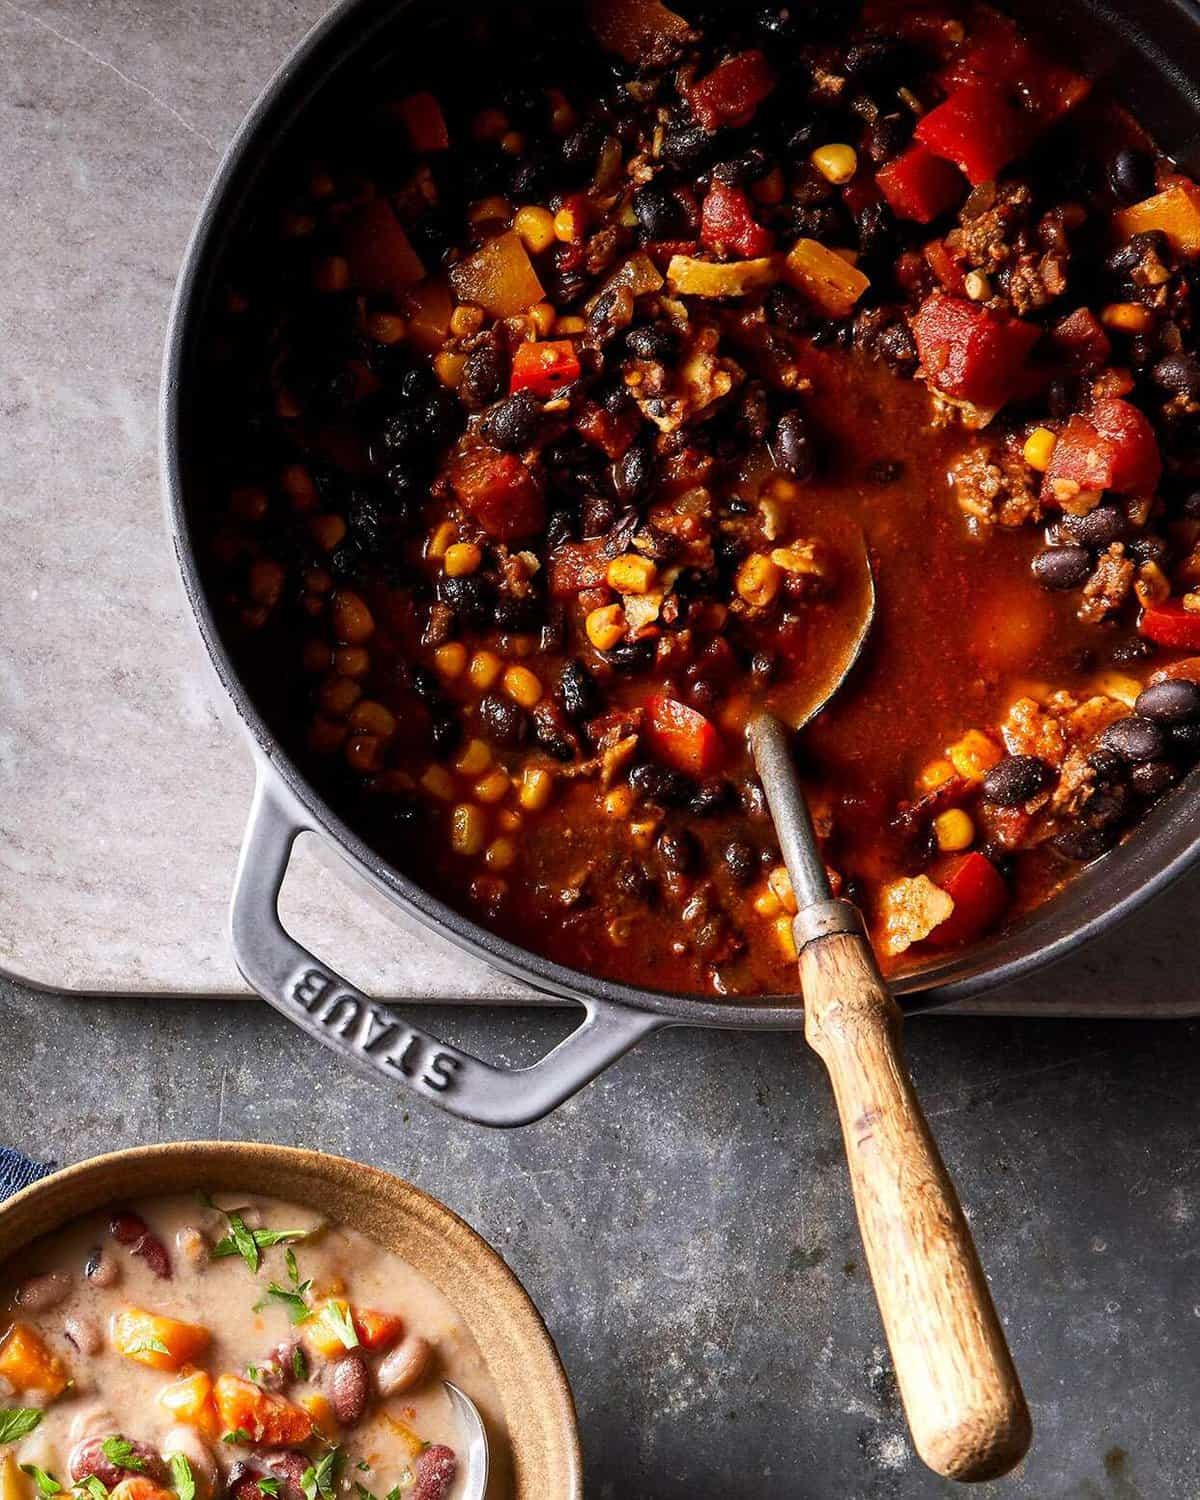  A hearty bowl of chili is the ultimate comfort food on a chilly day.